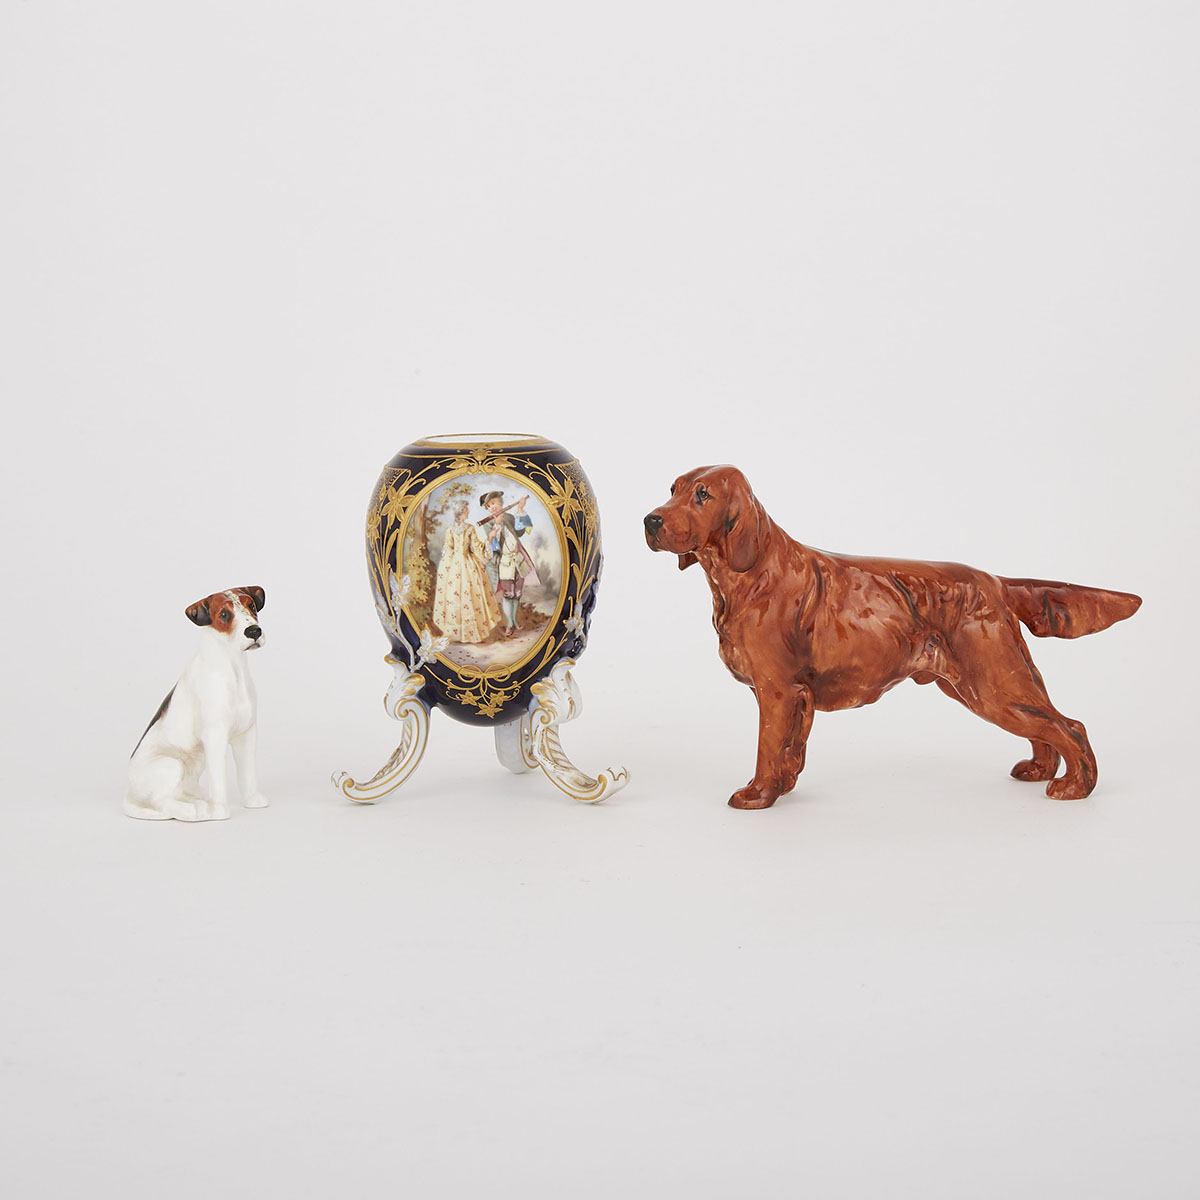 Berlin Small Vase and Two Royal Doulton Dog Figures, 20th century